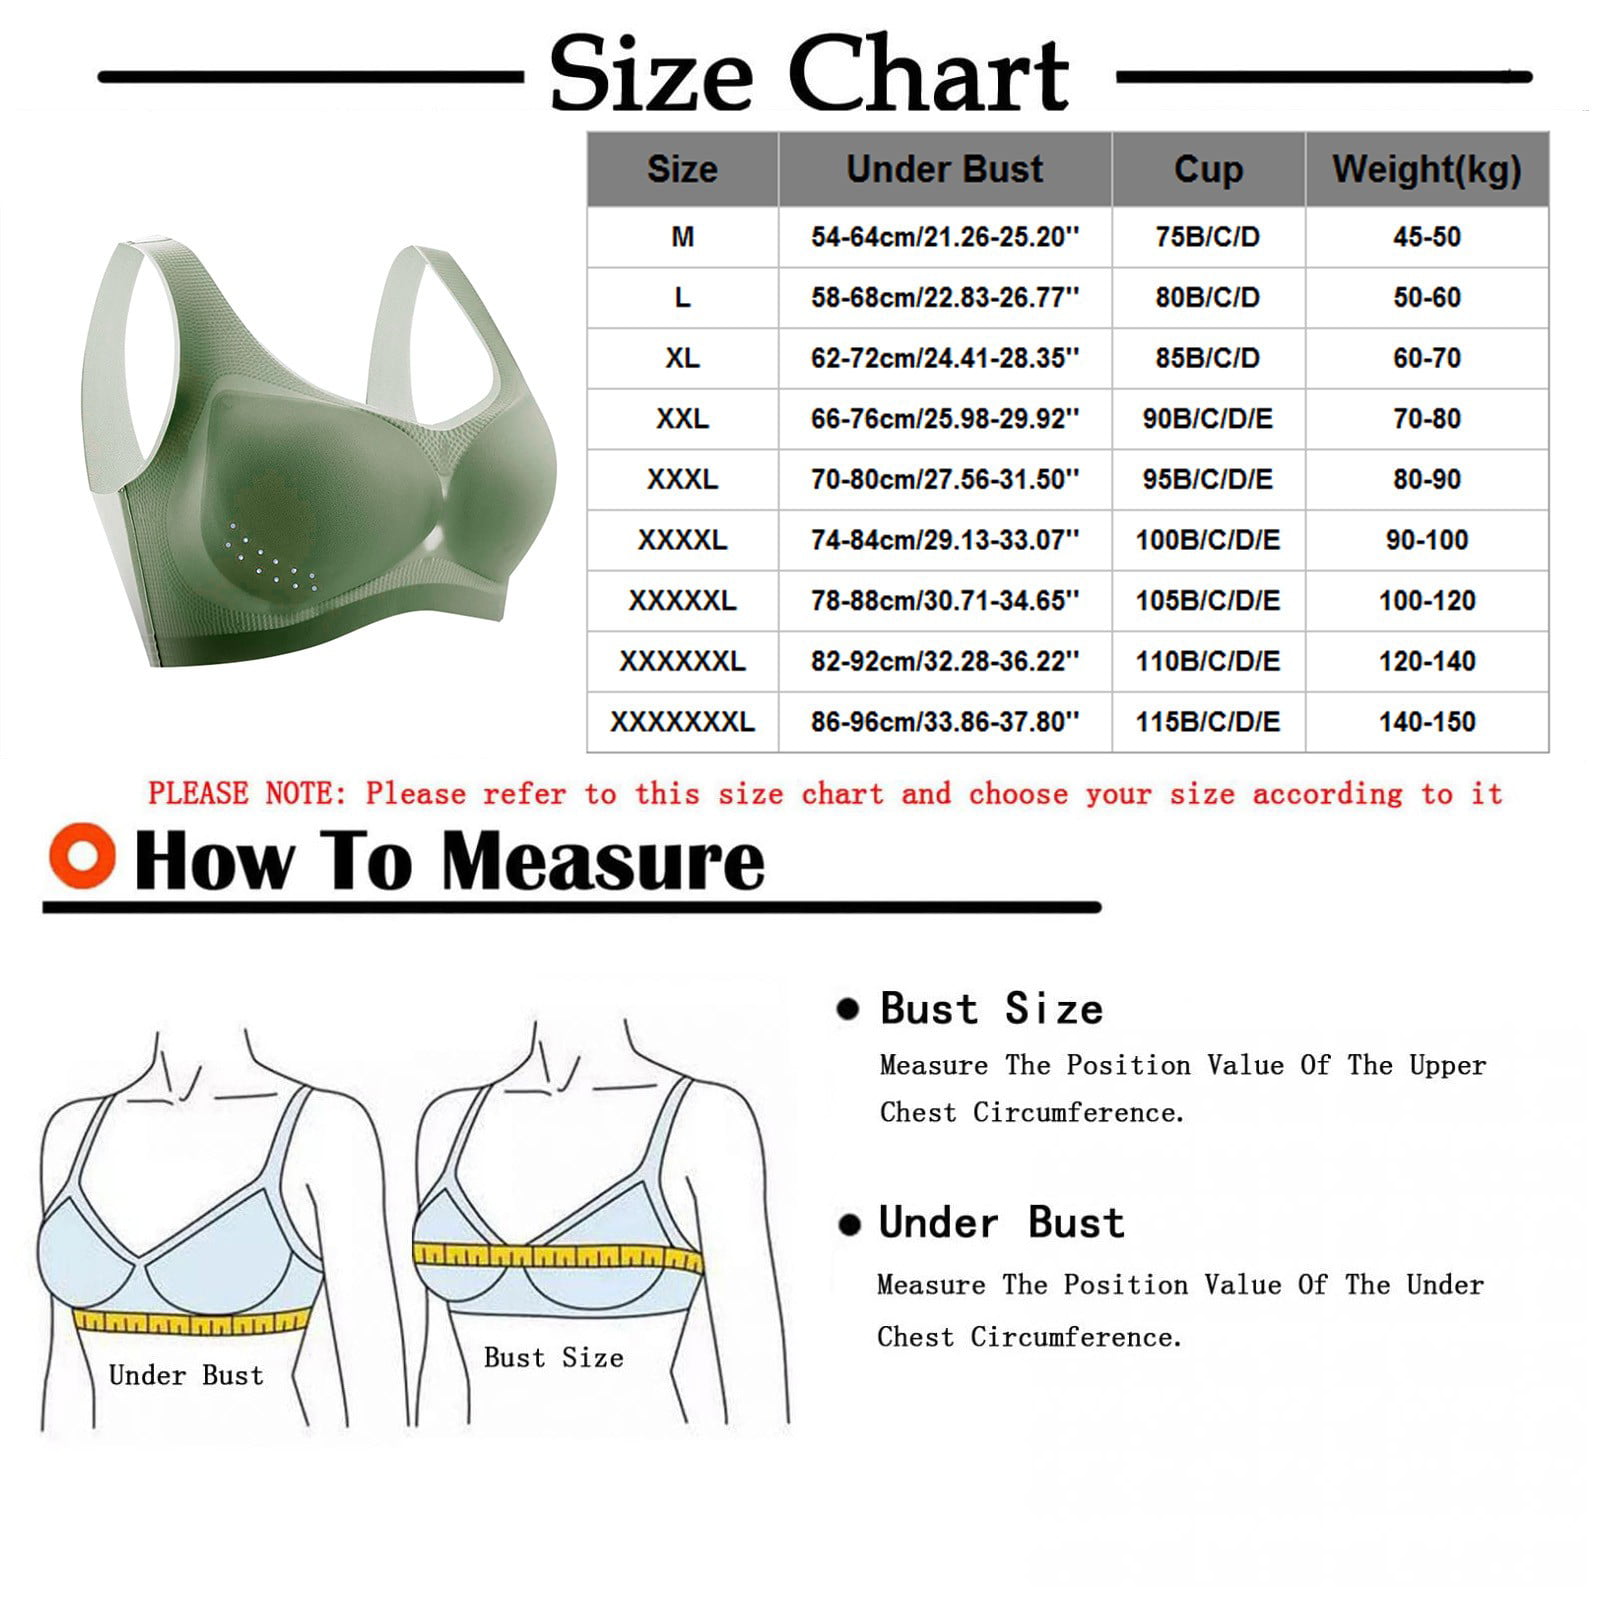 TQWQT Lady Bra Push Up Seamless Thin Wire Free No Constraint Women  Brassieres Daily Wear Clothes,Complexion XXL 